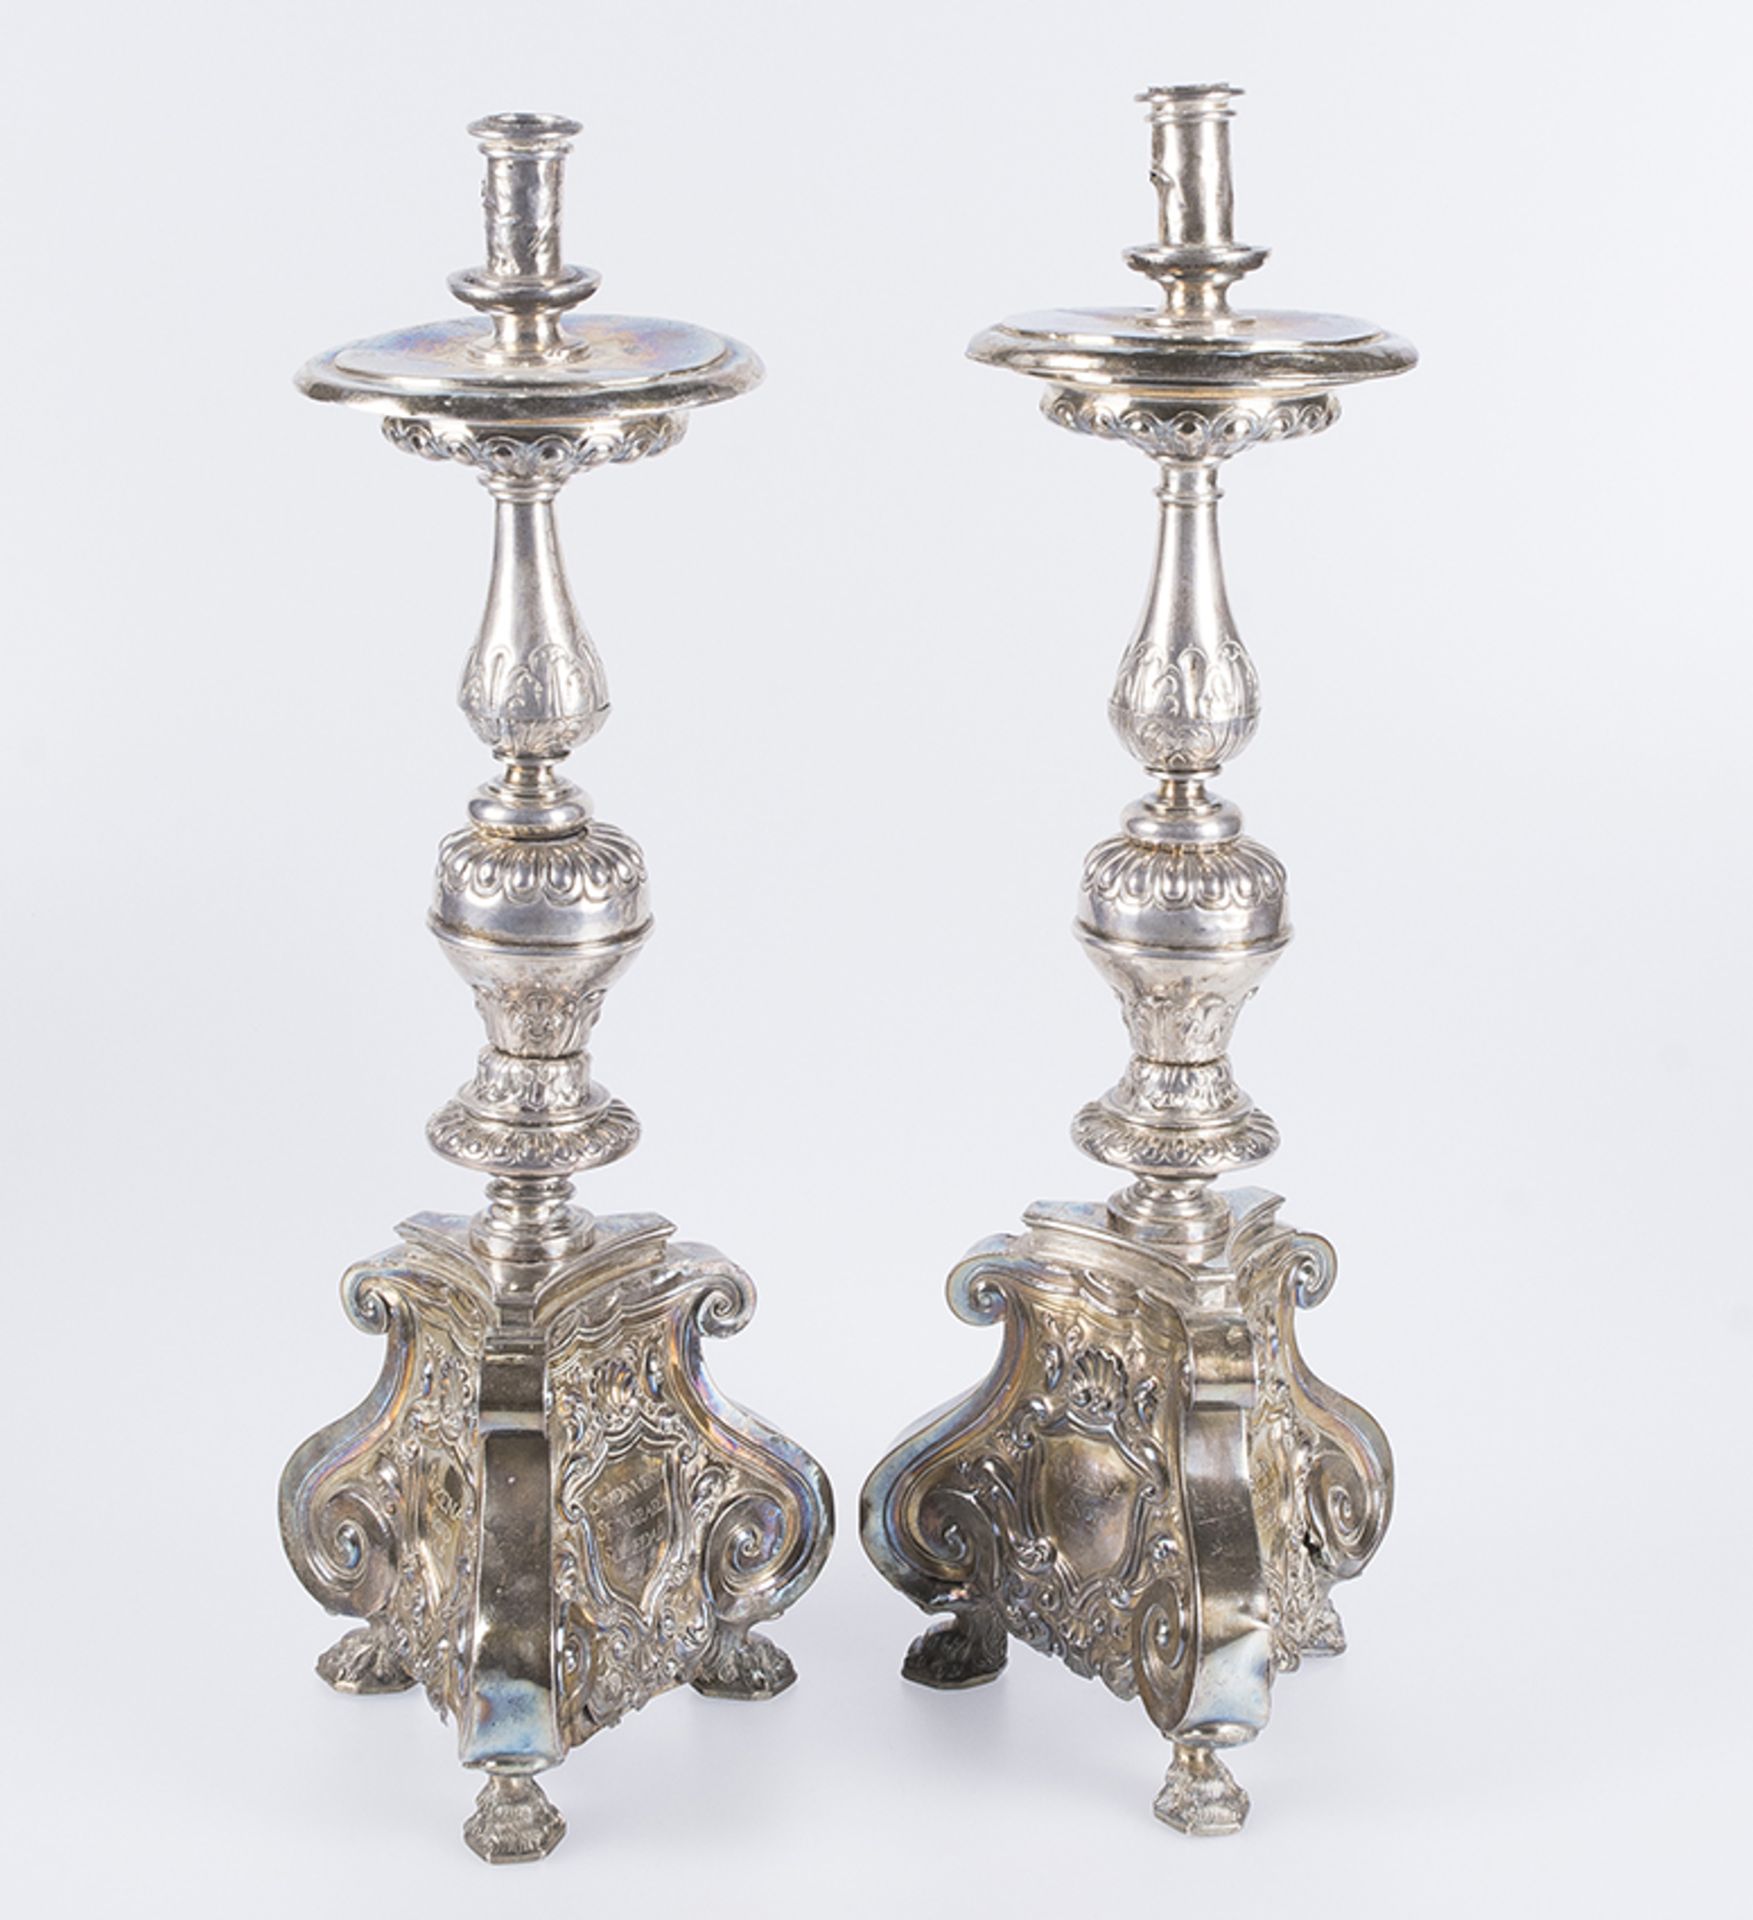 Pair of carved, embossed and chiselled silver candlesticks punched with the &quot;MAS&quot; mark by - Image 2 of 5